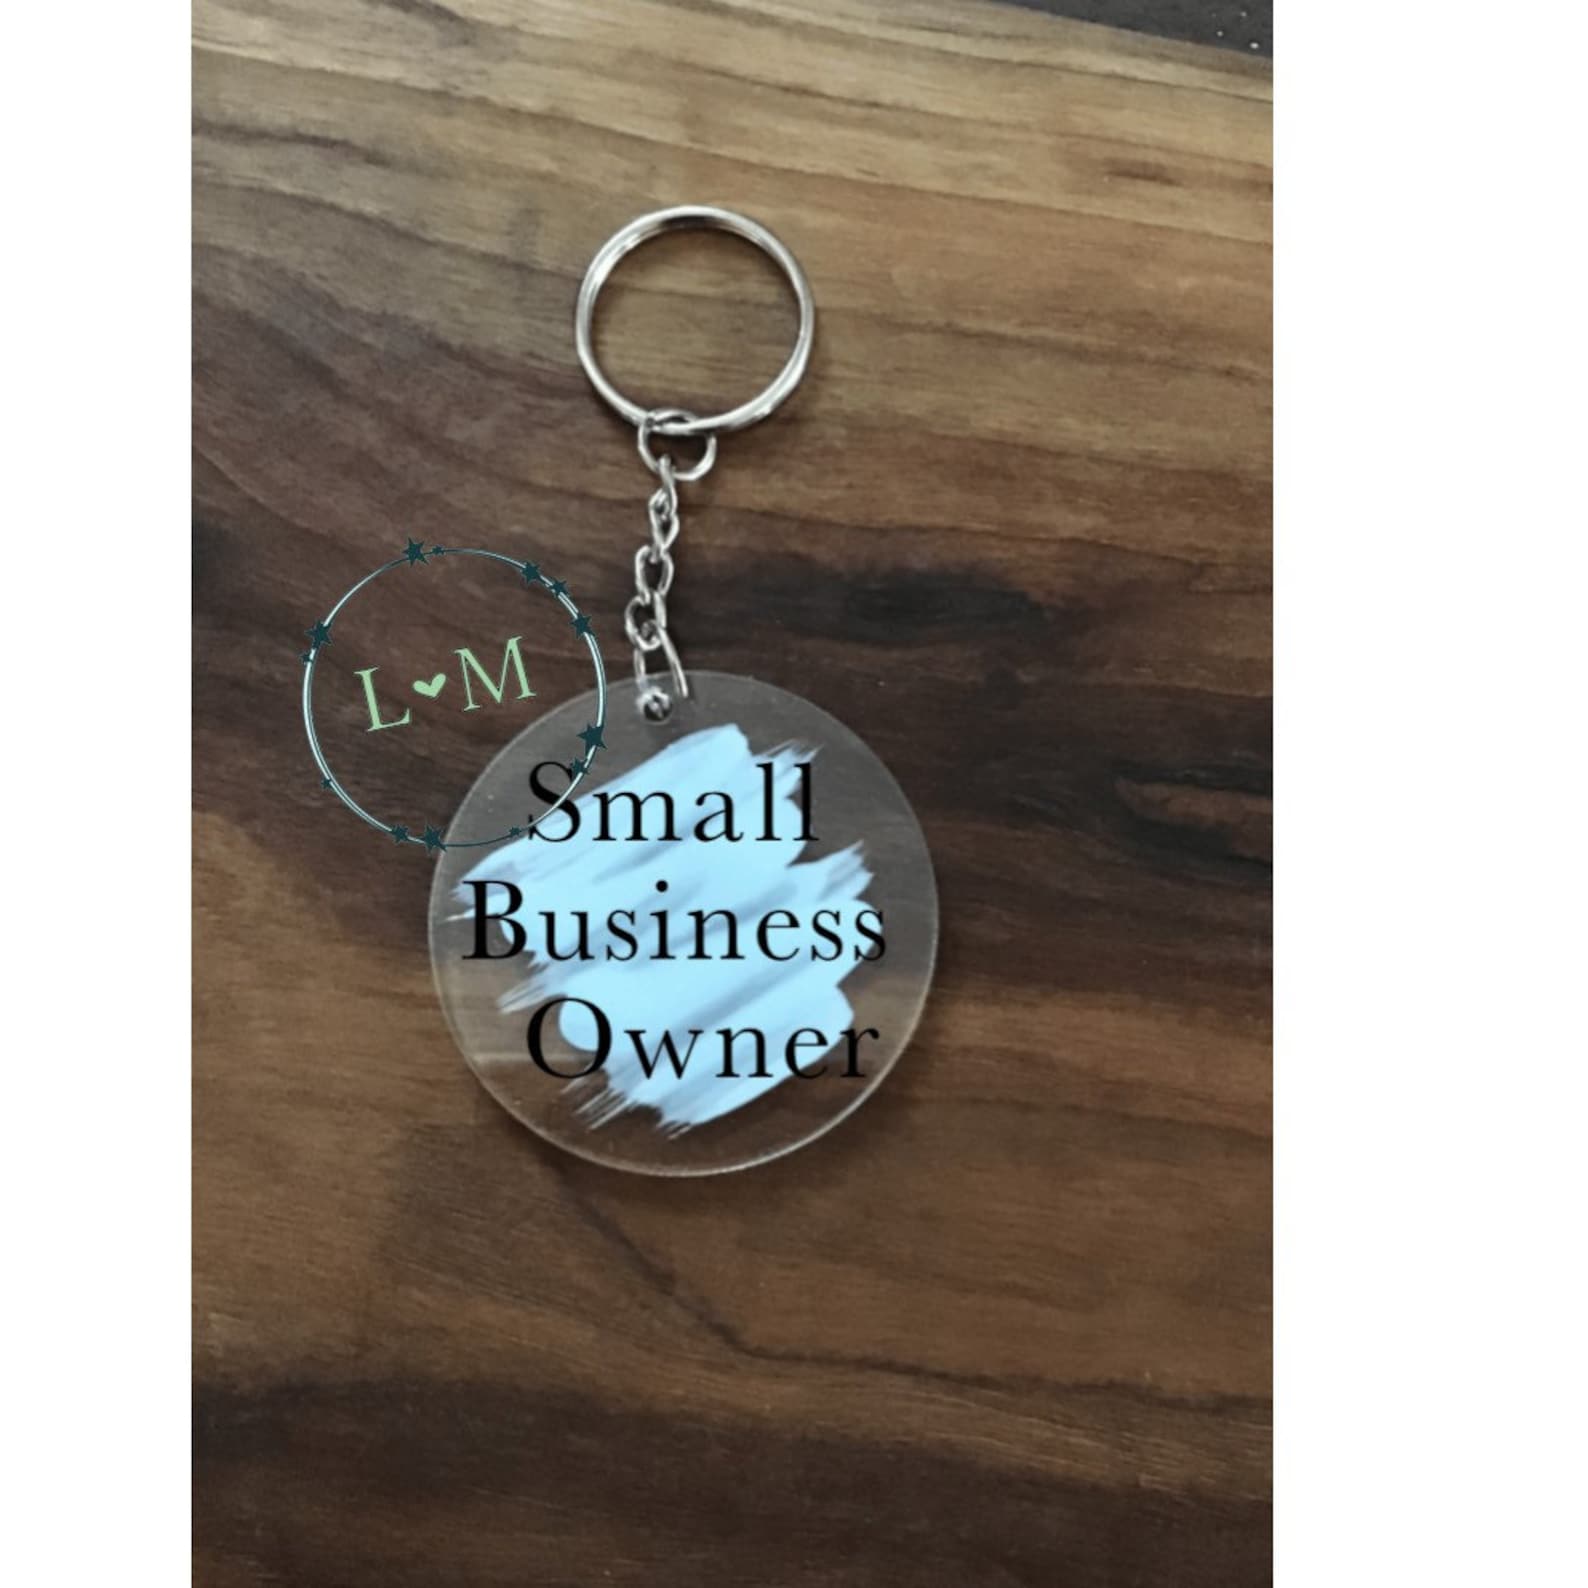 Small business owner key chain small business acrylic key